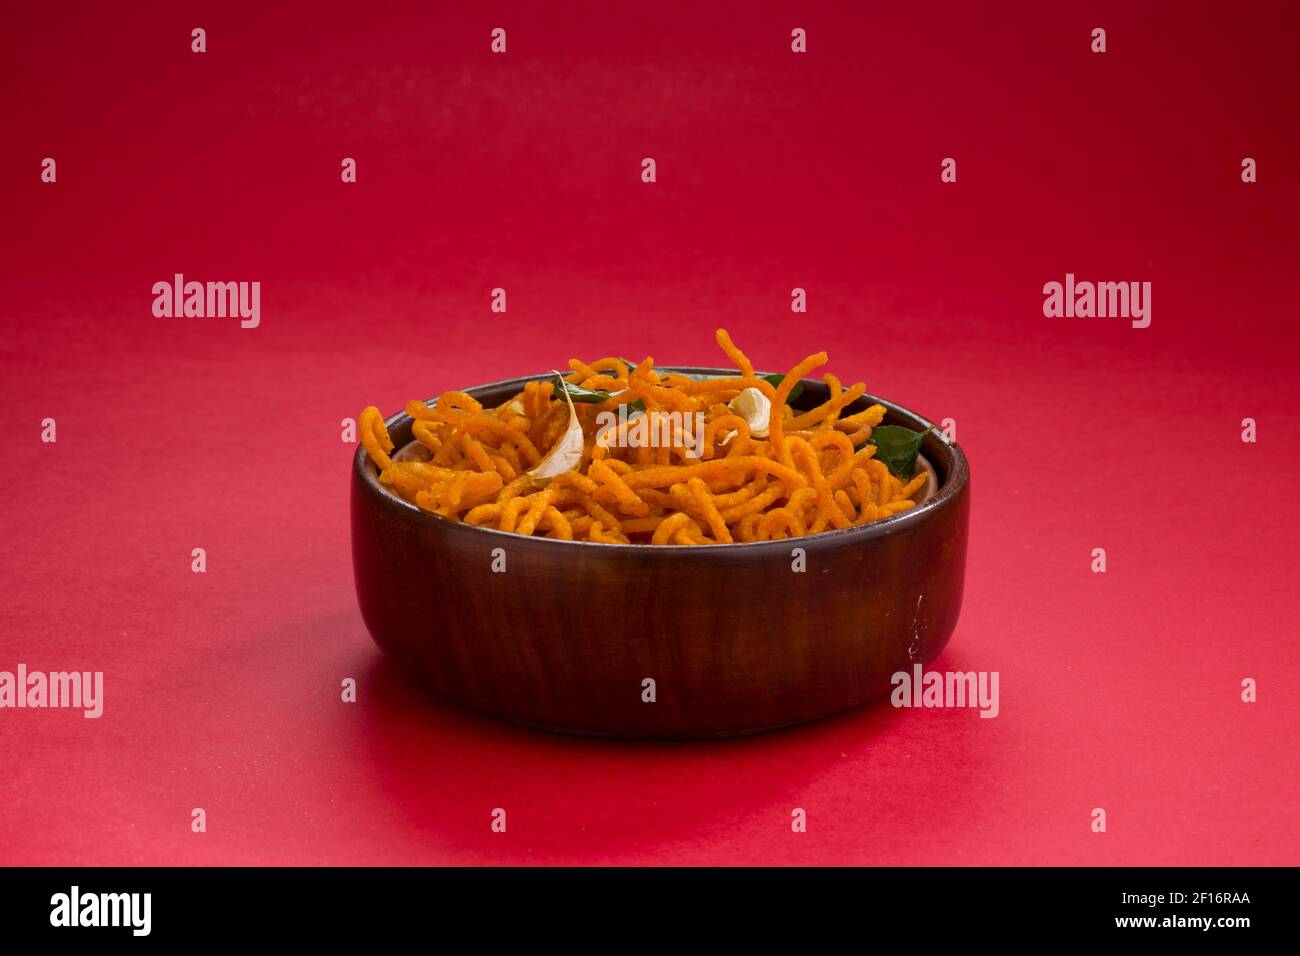 Indian snacks Besan sev or Namkeen sev garnished with fried curry leaves and garlic cloves  in a wooden bowl with red textured background. Stock Photo